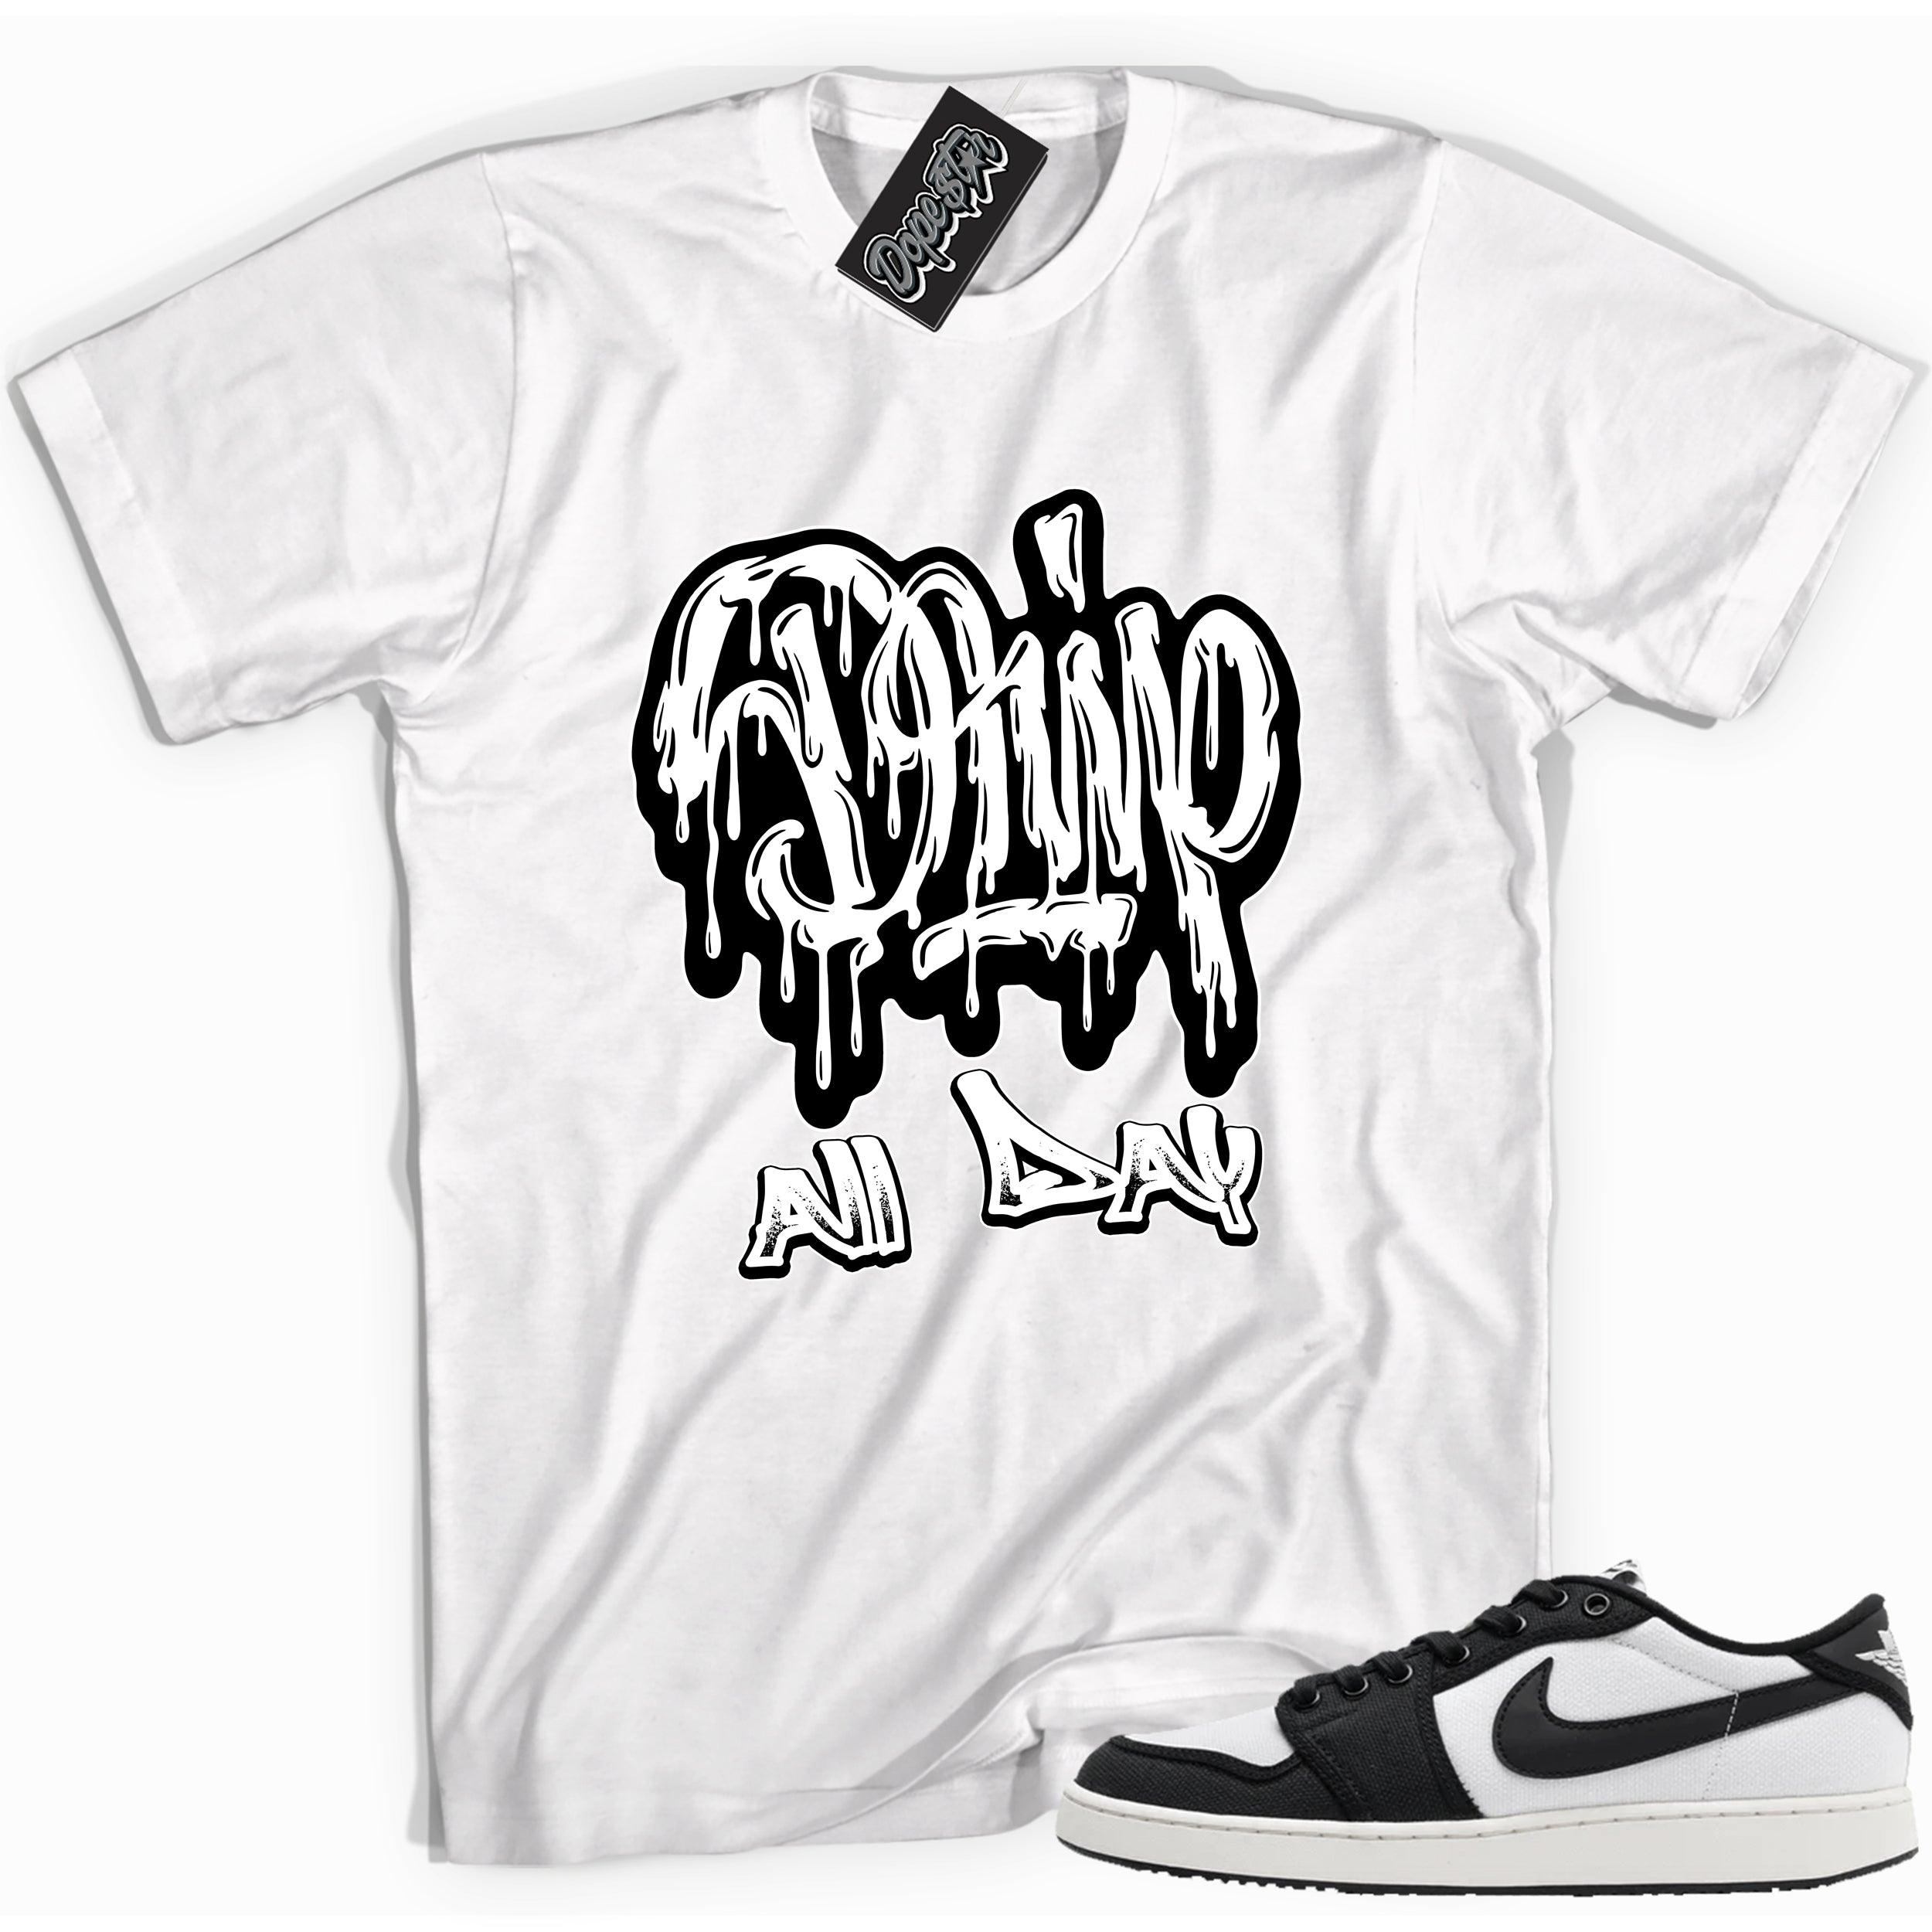 Cool white graphic tee with 'drip all day' print, that perfectly matches Air Jordan 1 Retro Ajko Low Black & White sneakers.